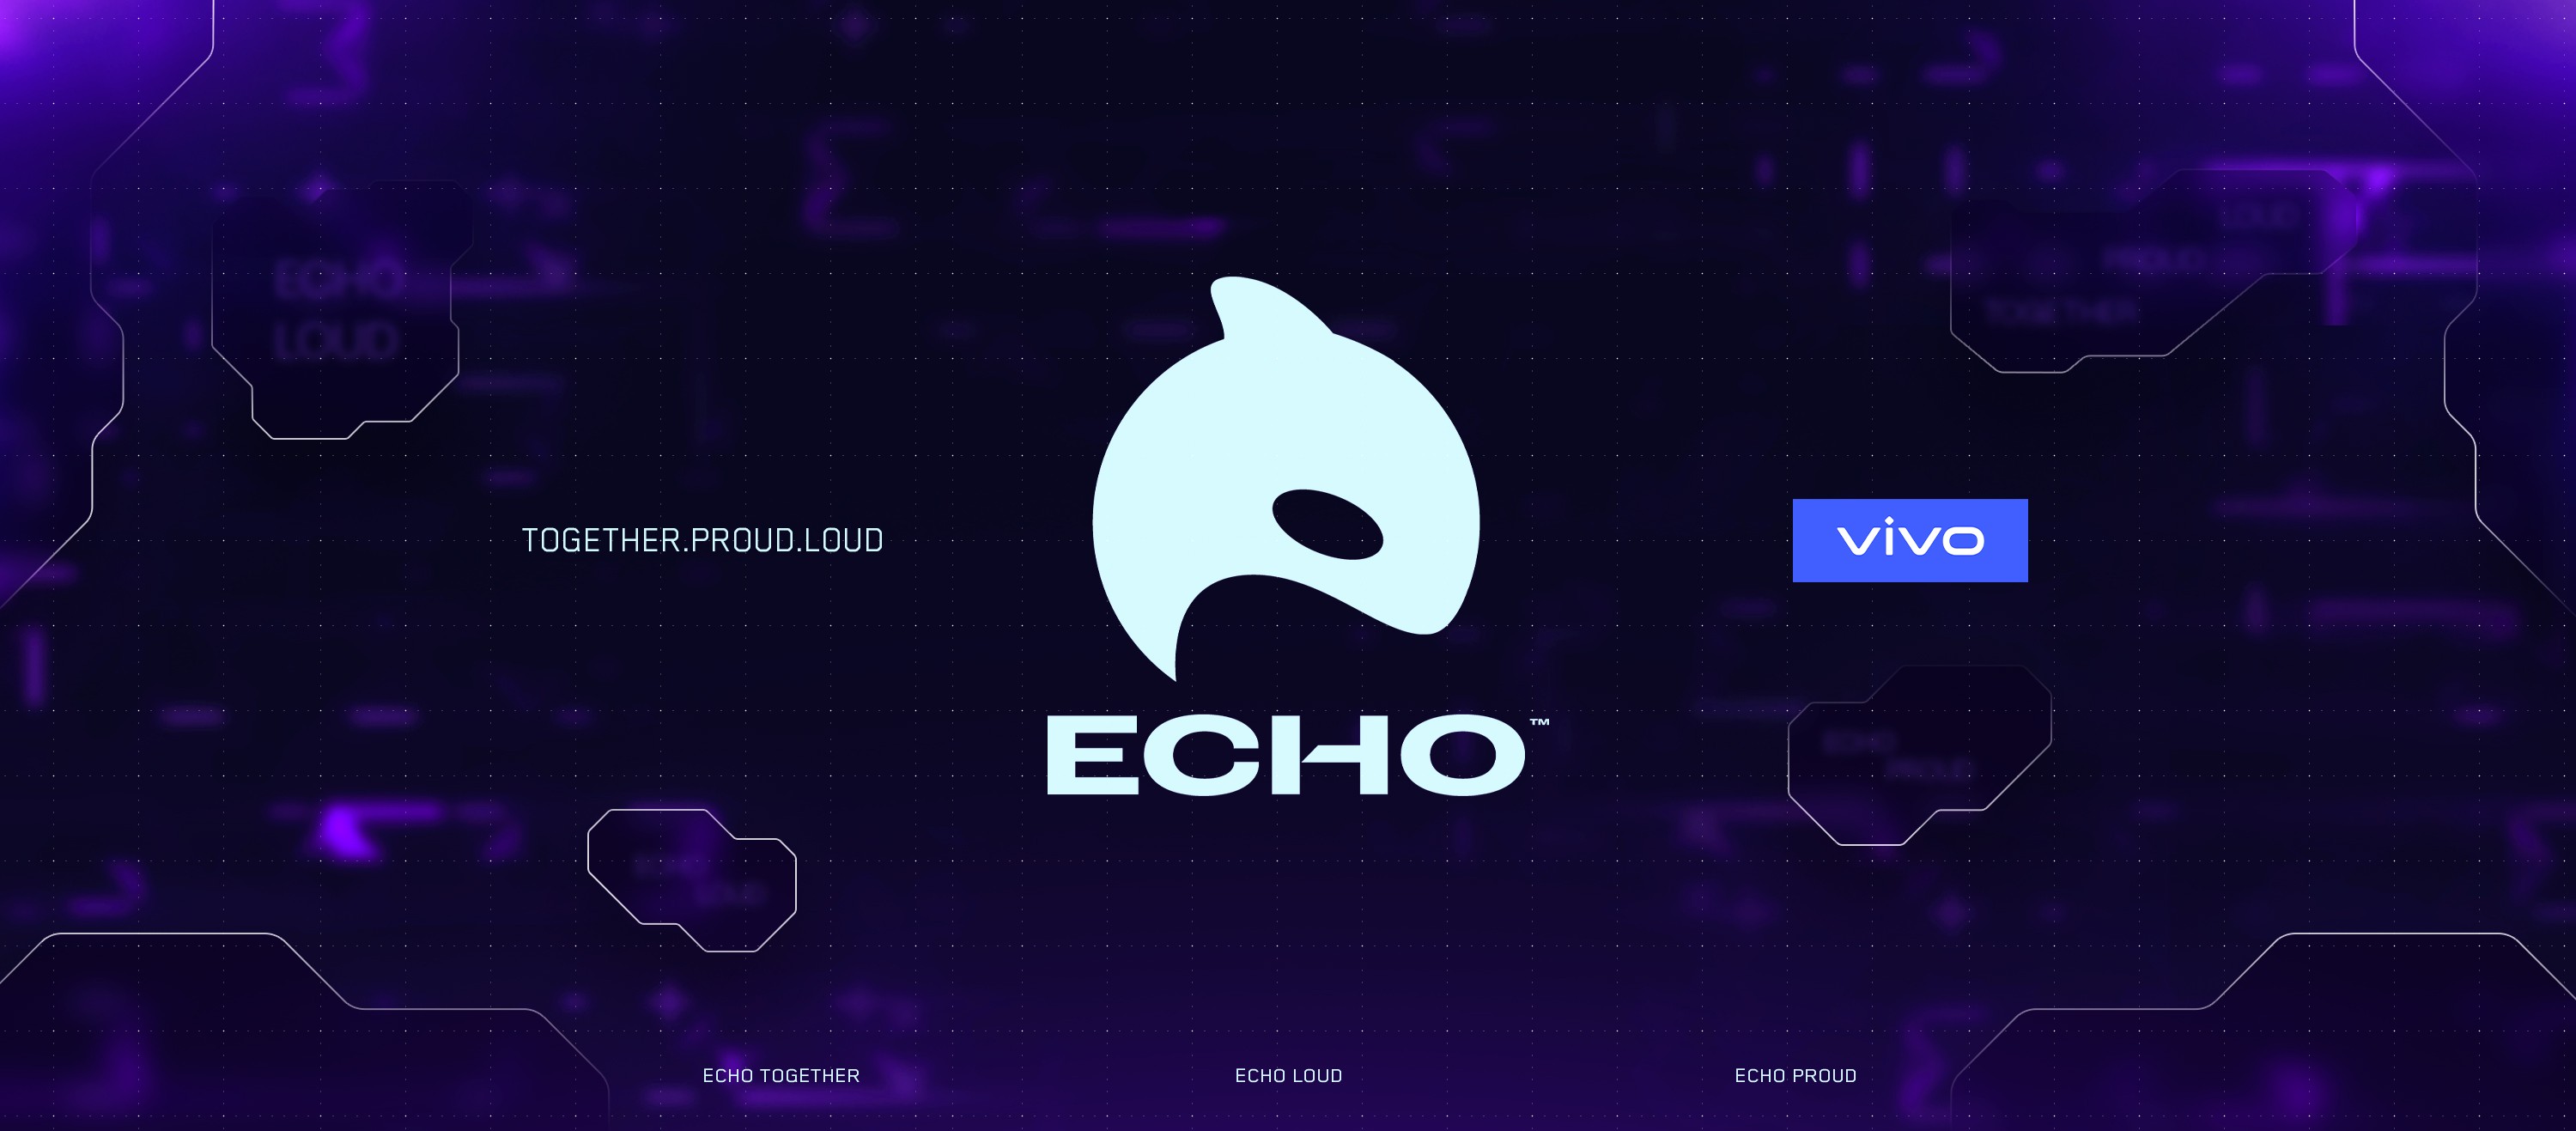 ECHO is the team to look out for this MPL Season 9